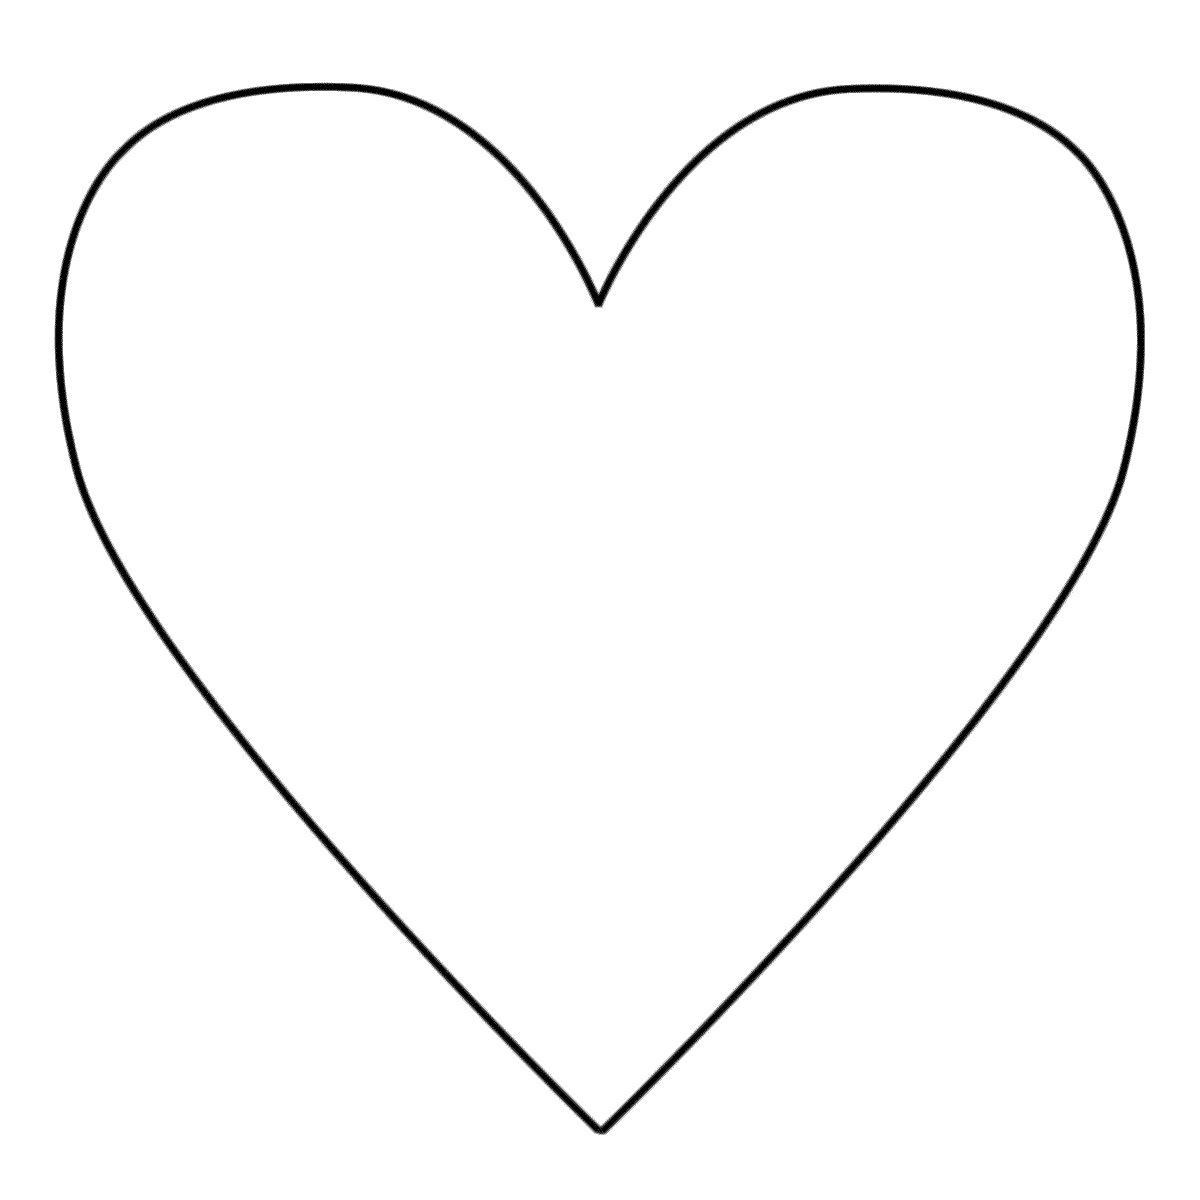 coloring pages of a heart heart coloring pages heart coloring pages heart heart coloring pages a of 